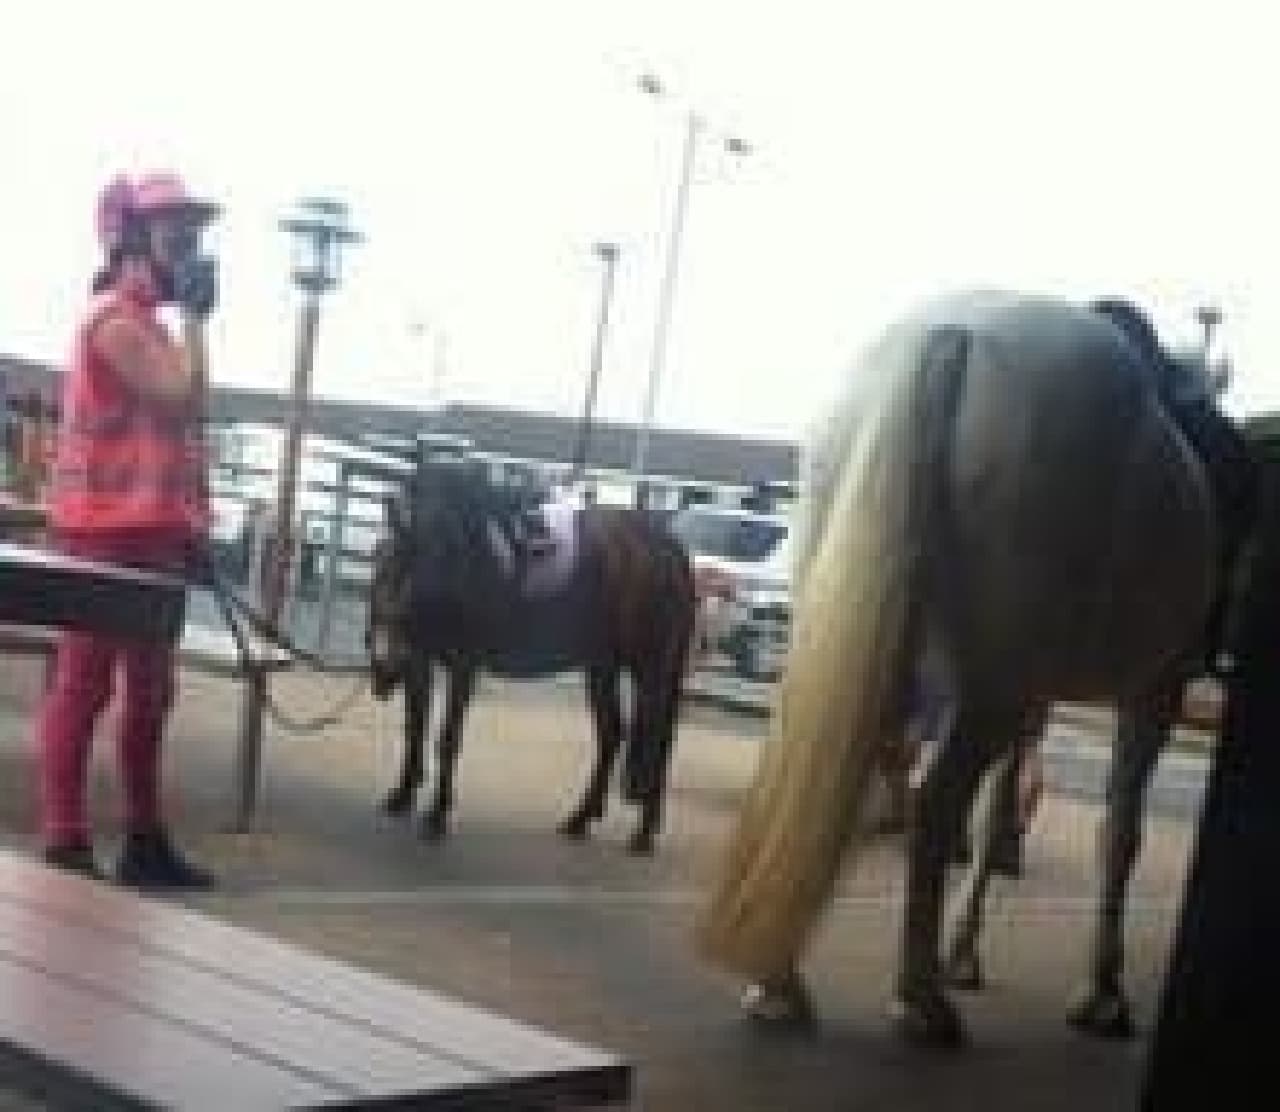 A girl came on a pony (Source: BBC)